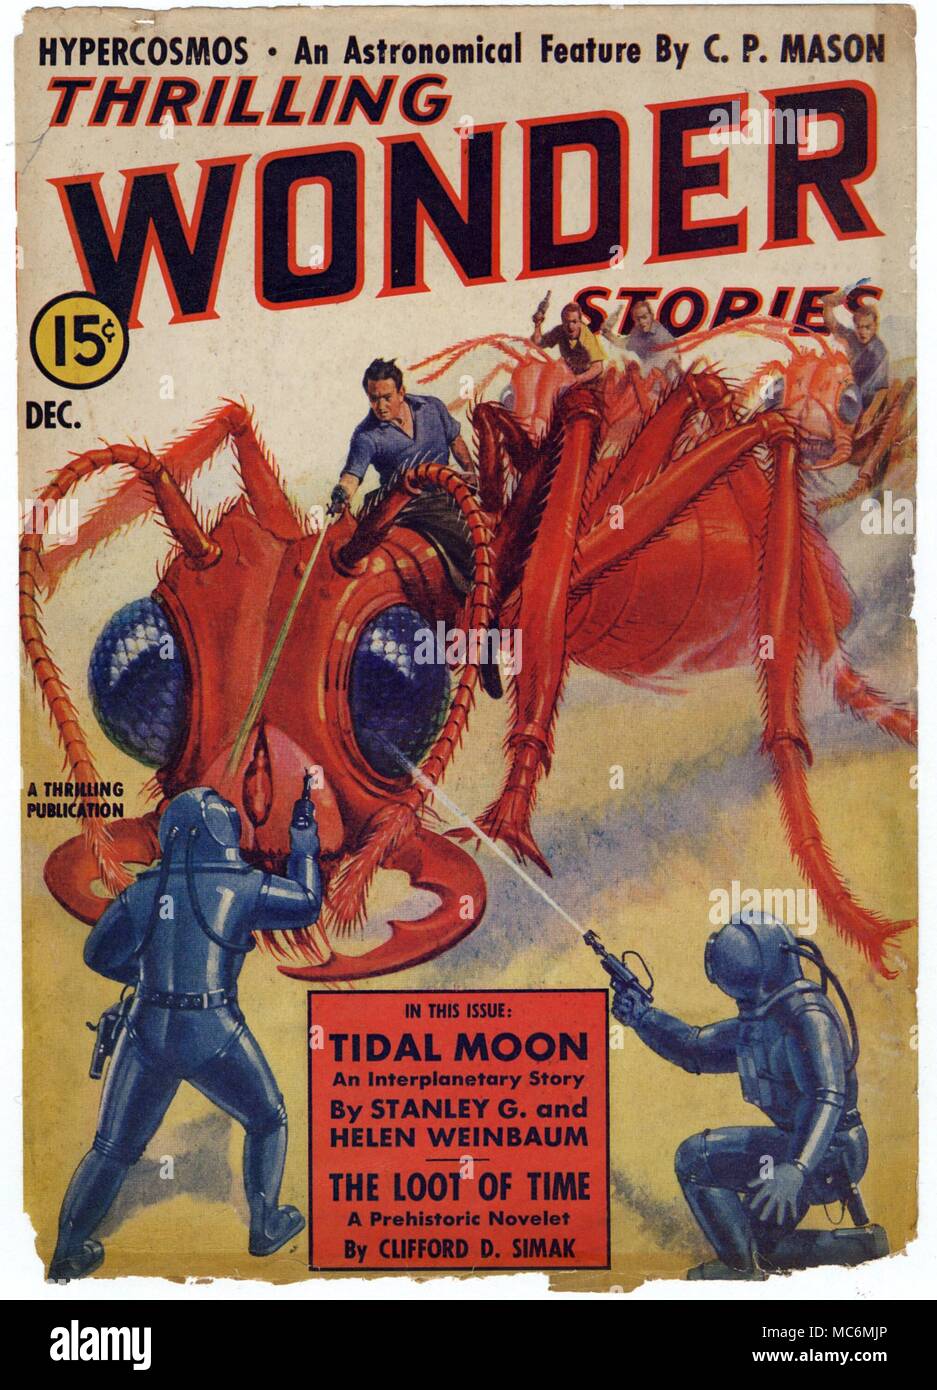 SPACE-MEN - MONSTERS - FANTASY Cover artwork for Thrilling Wonder Stories, Vol. XII, No. 3, December, 1938, to illustrate a short story by Will Garth, Hands Across the Void. Monster giant red ants attack a group of spacemen. Stock Photo